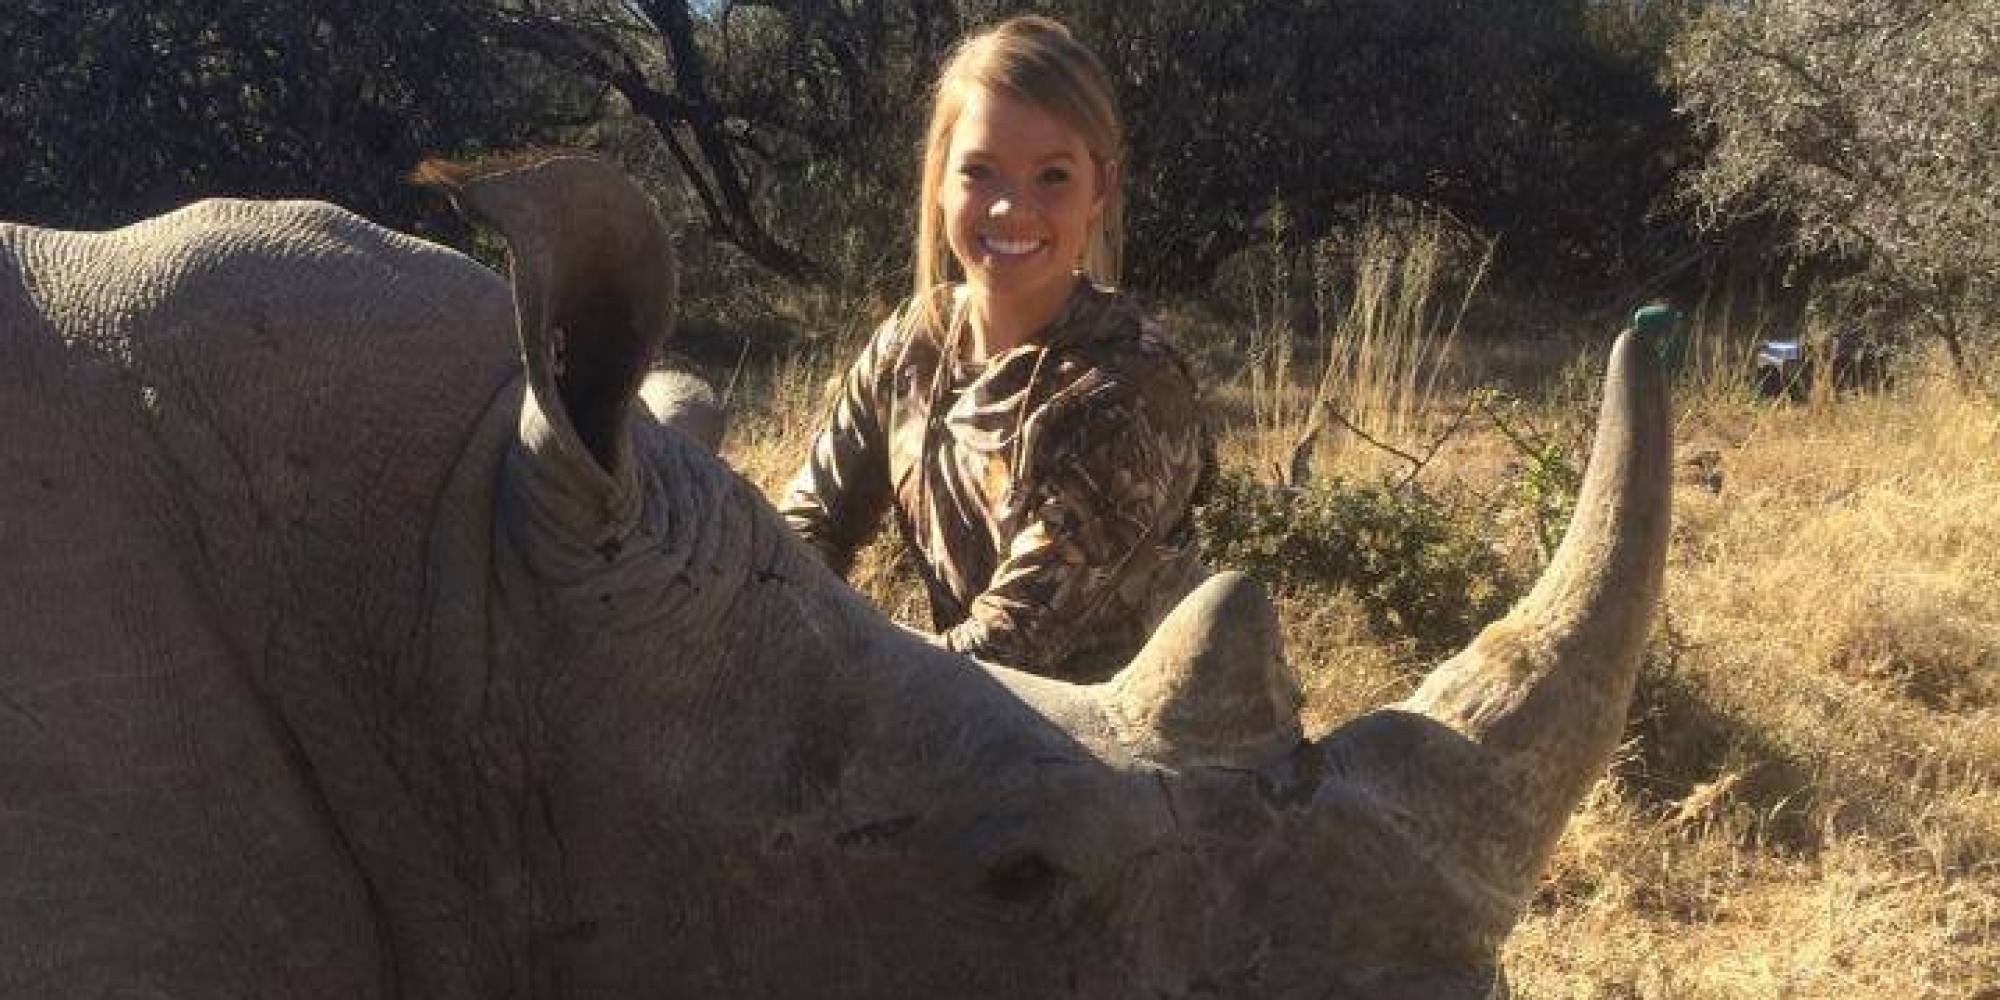 Kendall Jones The Texas Cheerleader And Big Game Hunter Makes People Very Mad